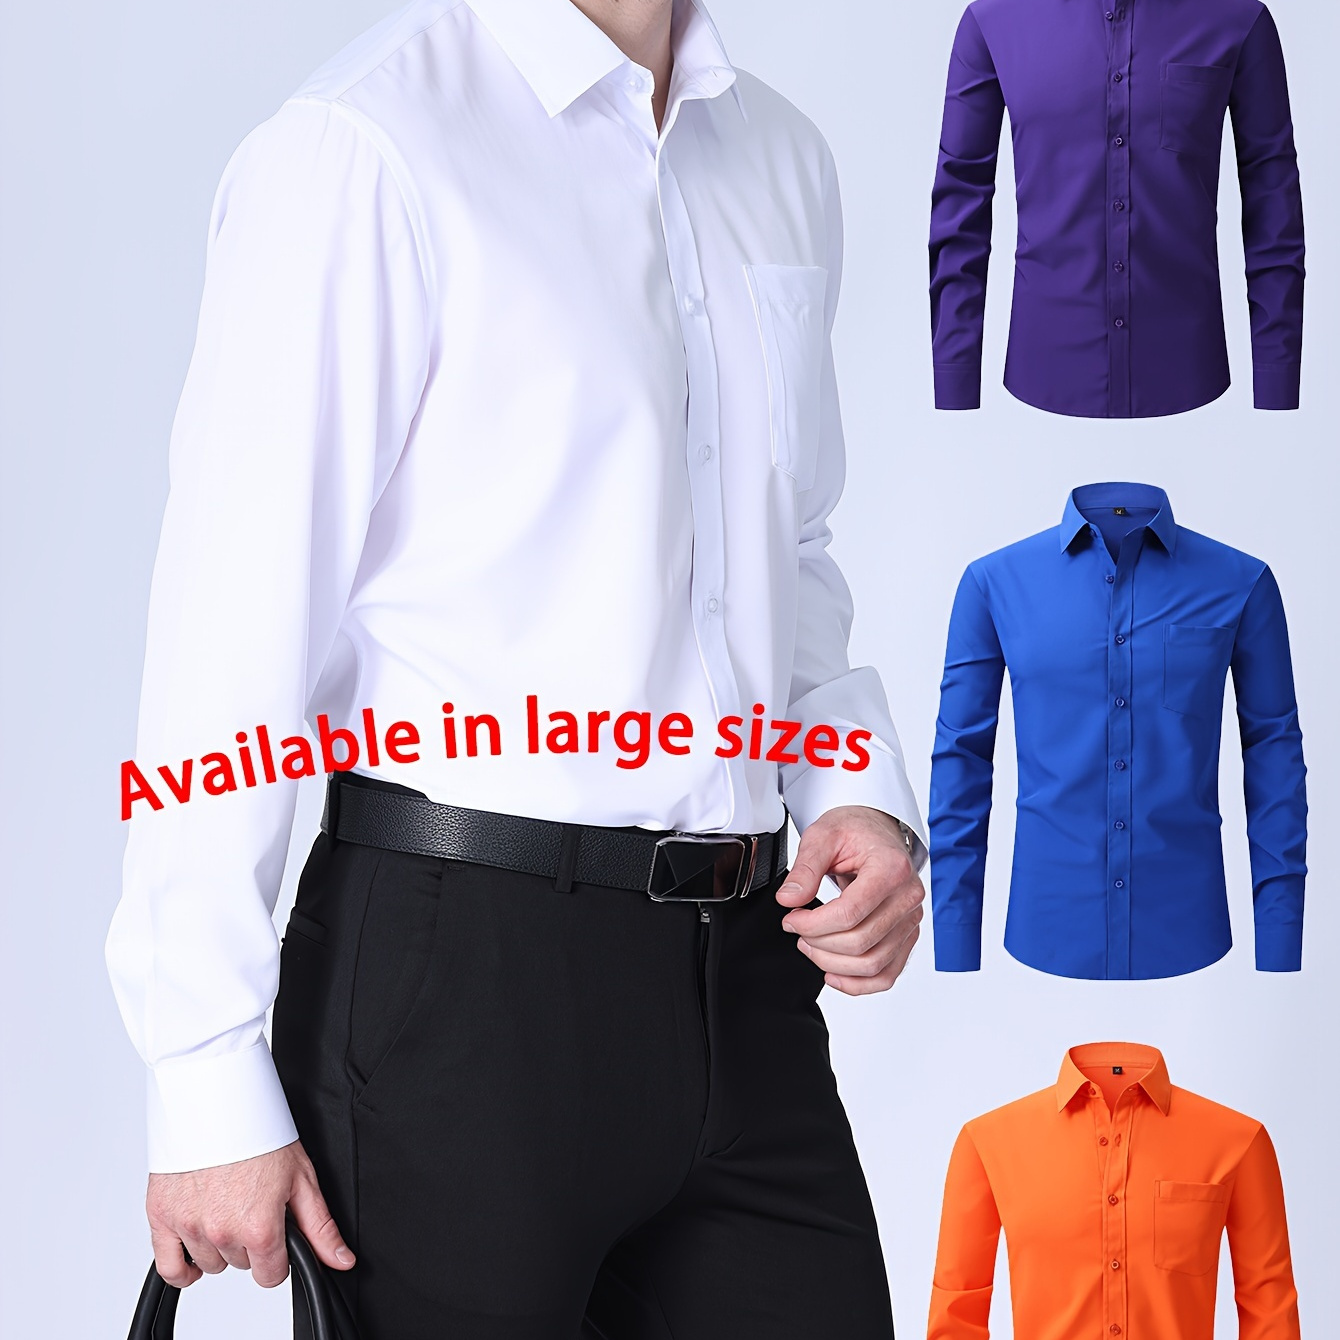 

Solid Color Men's Mature Dress Shirt For Dating Banquet, Men's Long Sleeve Button Up Shirt With Chest Pocket, Spring Fall